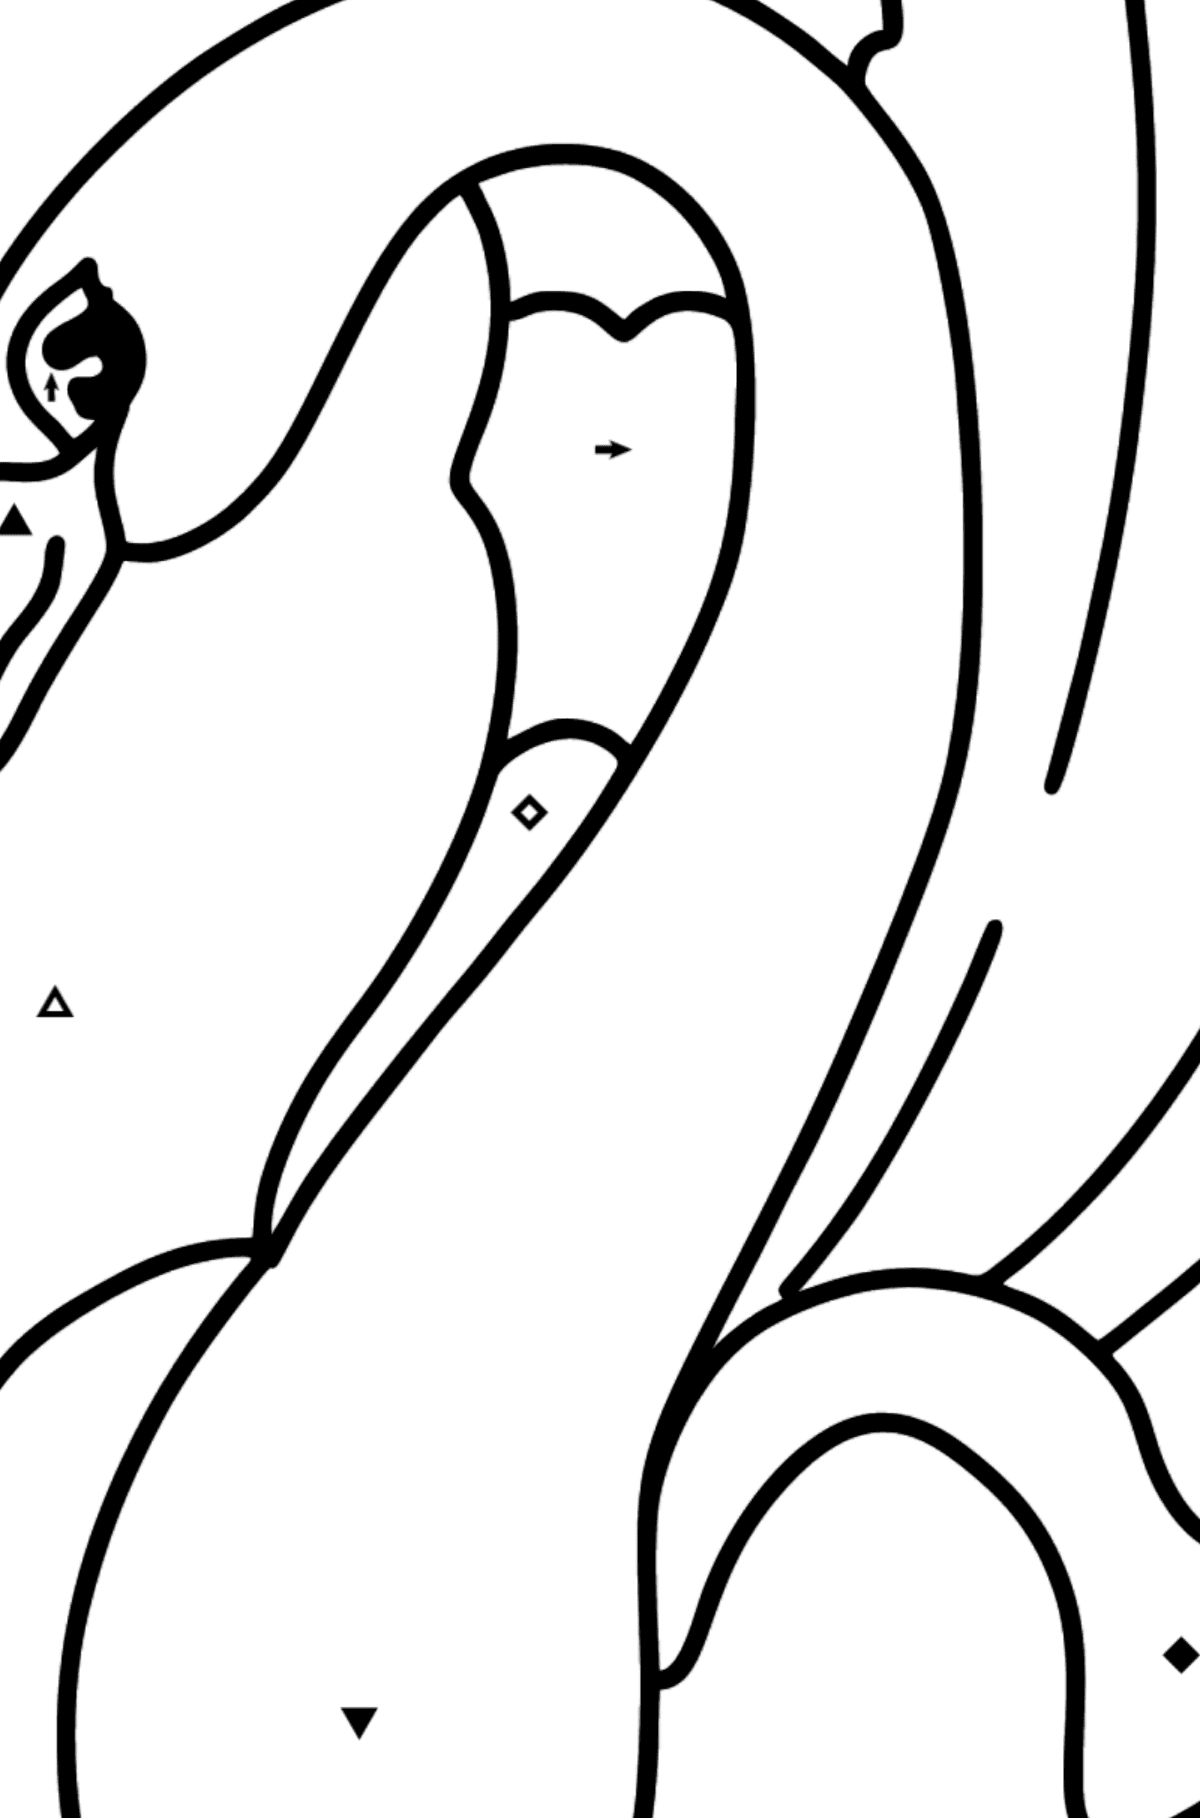 Black Swan coloring page - Coloring by Symbols for Kids